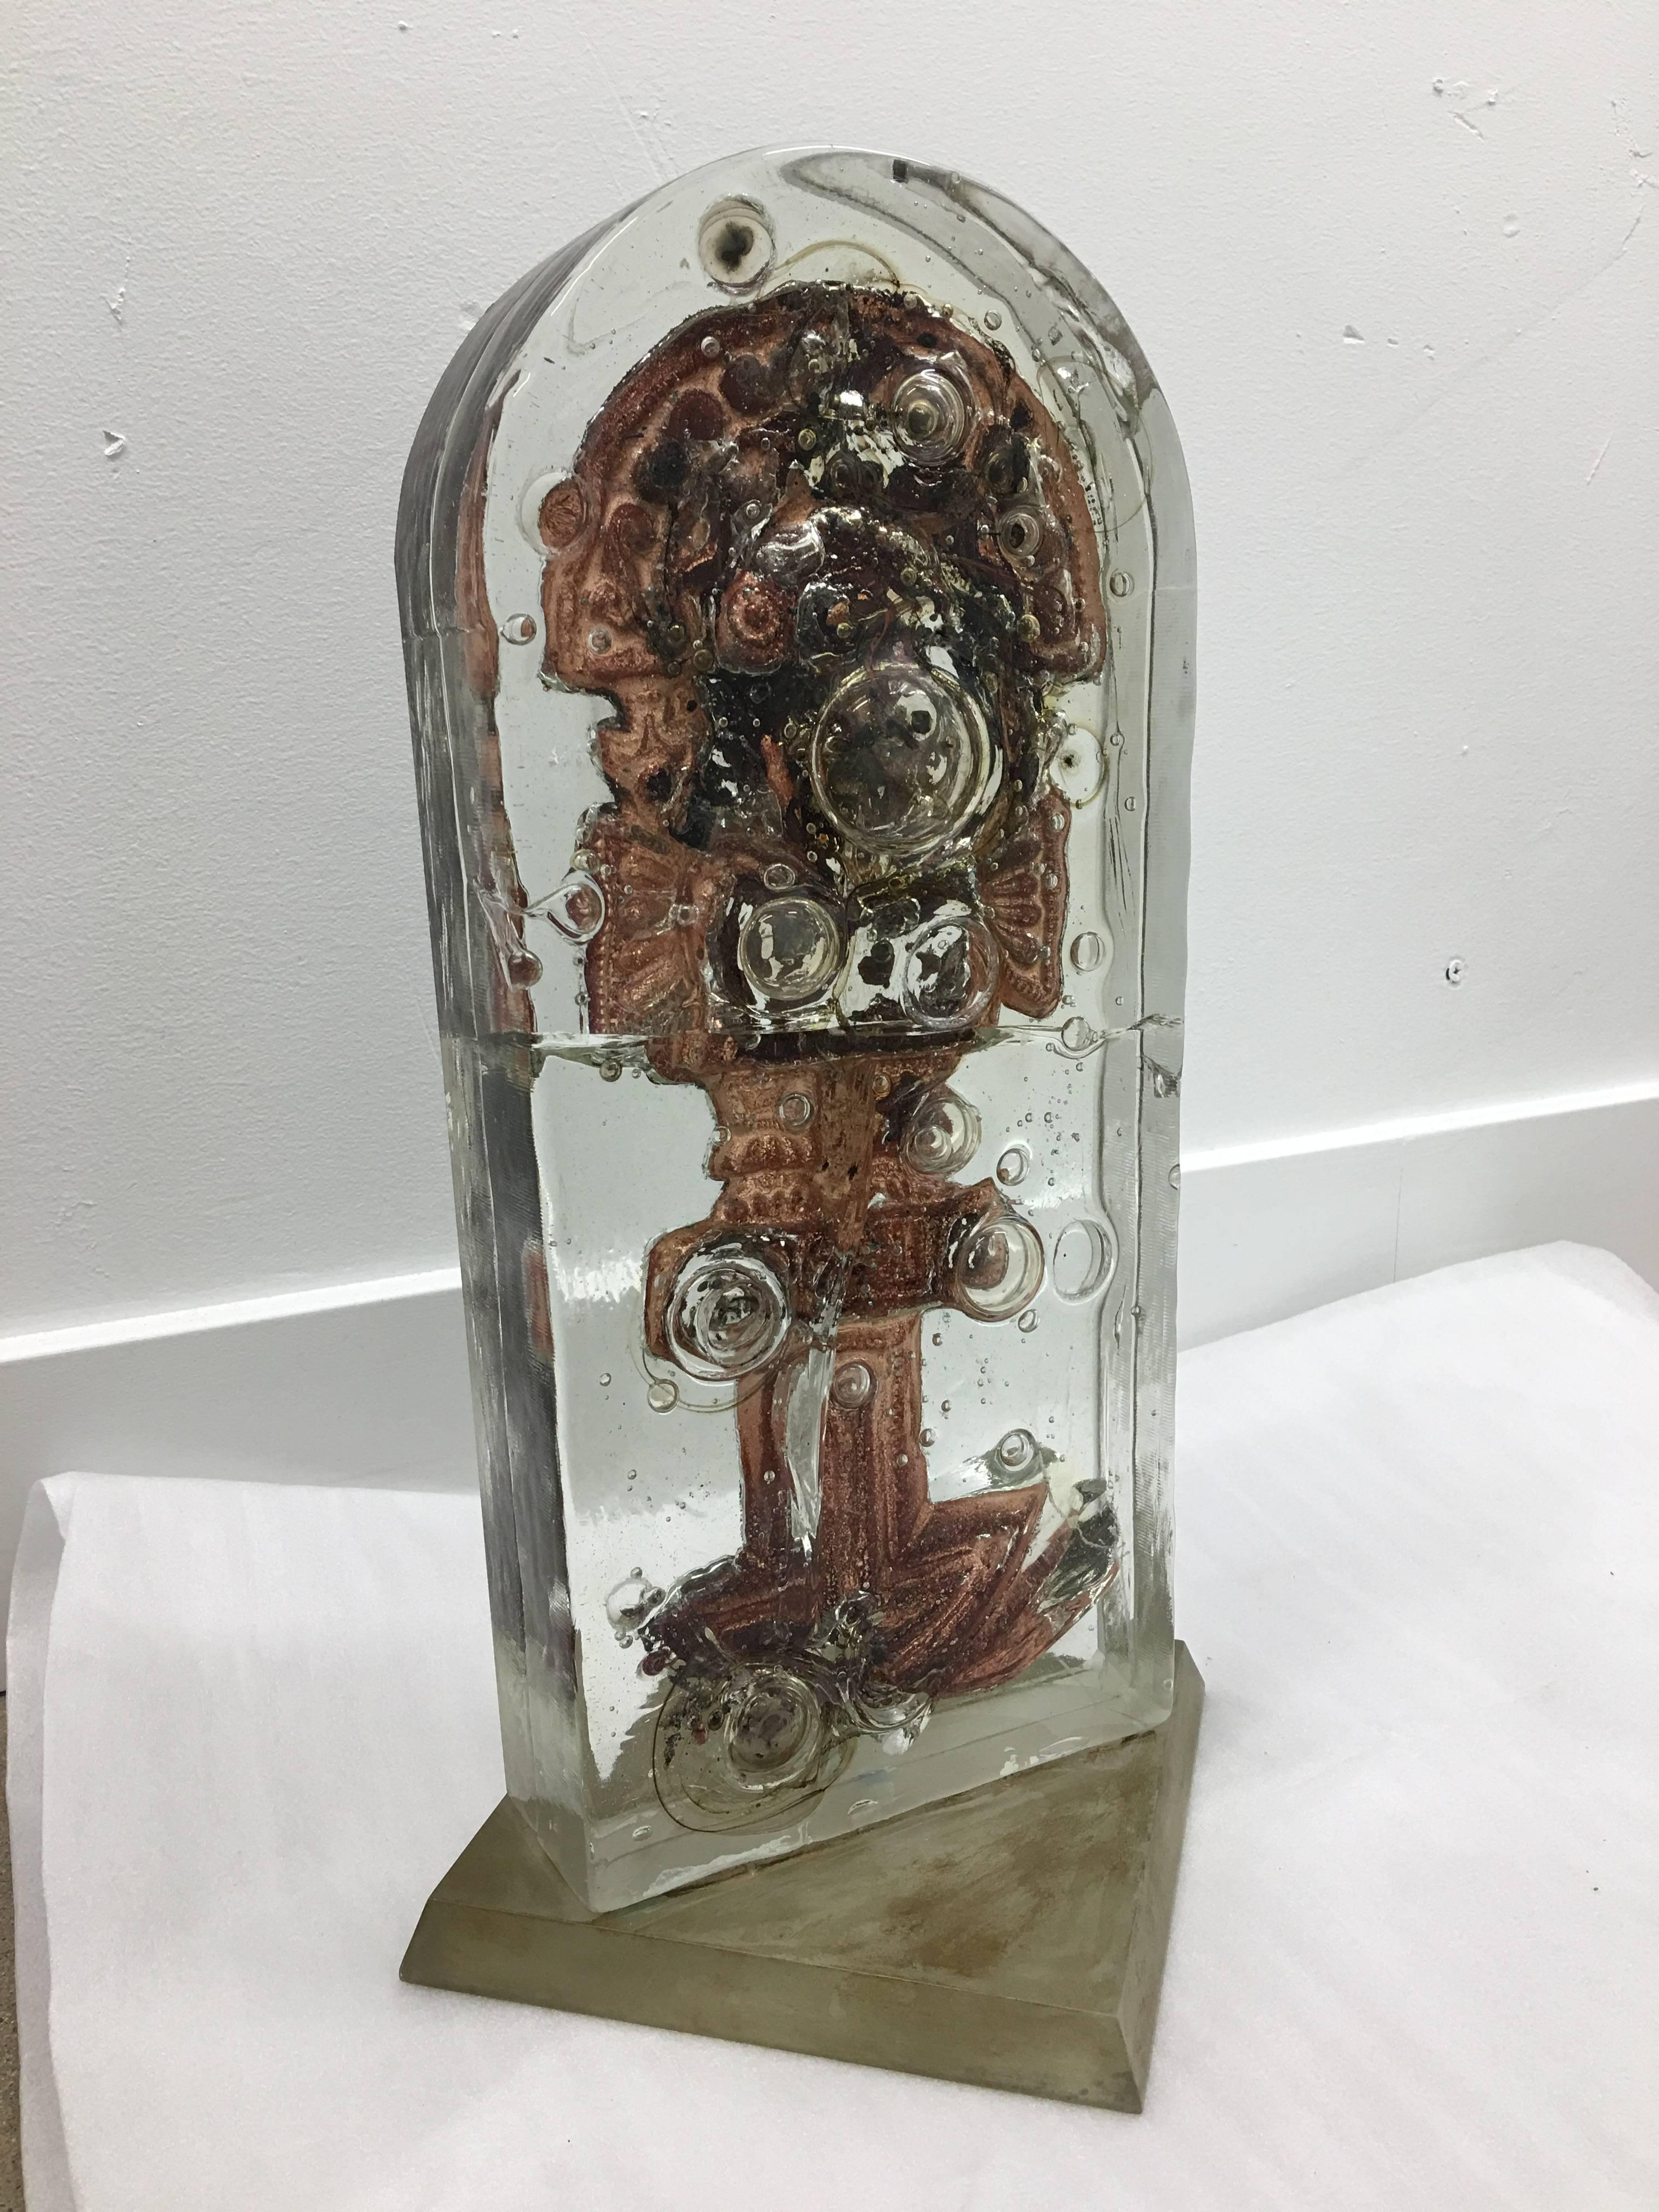 This is a unique and one-of-a kind sculpture combining a copper infused interior within a glass capsule. This piece is mounted on a wooden base. Found in Arizona, where copper mines are abundant this piece may have a pedigree that remains a mystery-